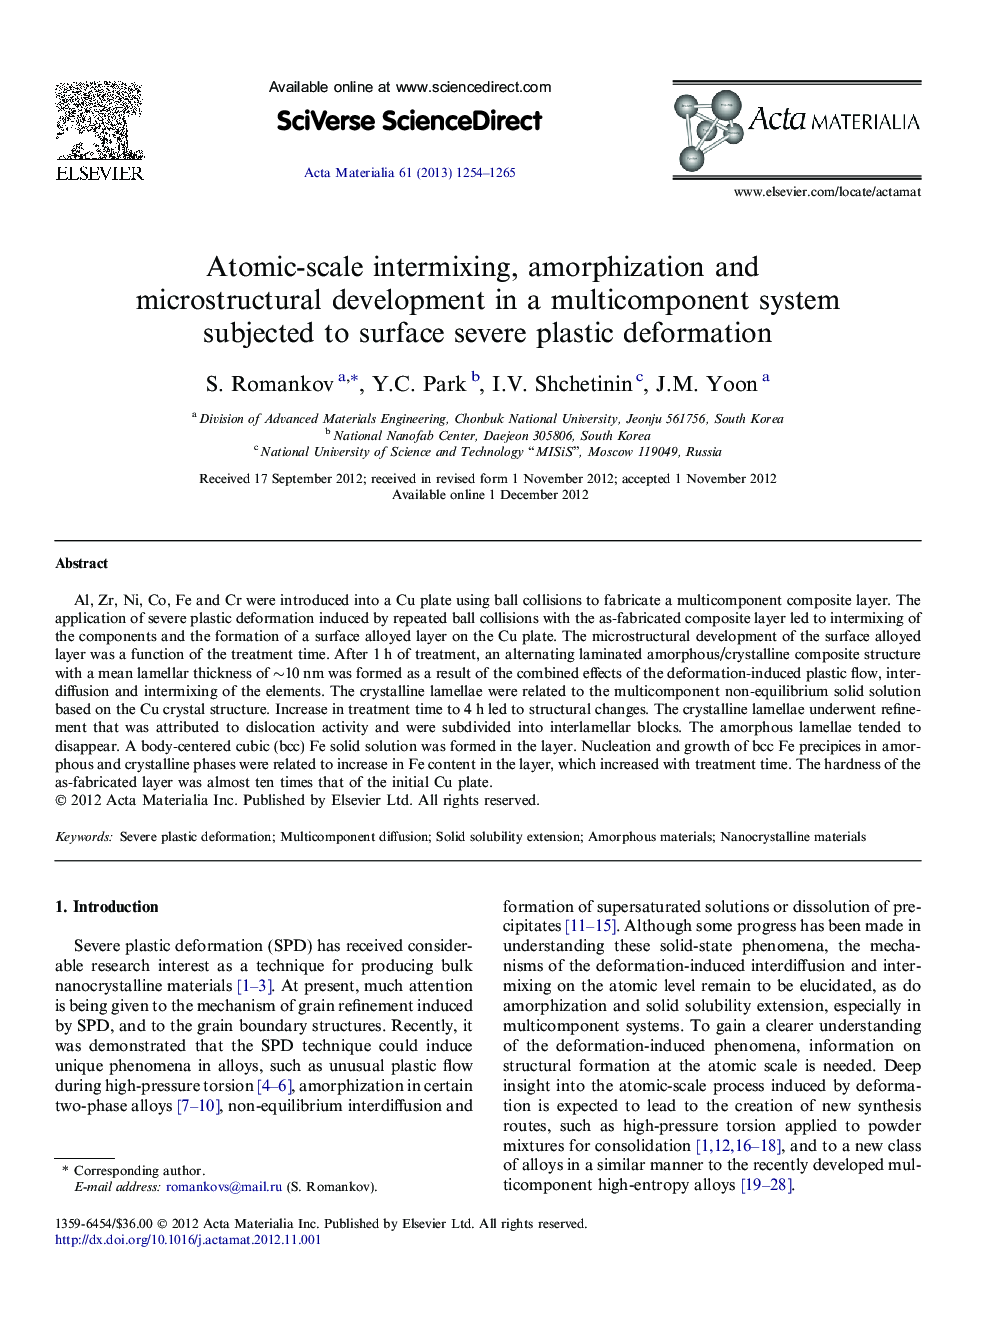 Atomic-scale intermixing, amorphization and microstructural development in a multicomponent system subjected to surface severe plastic deformation